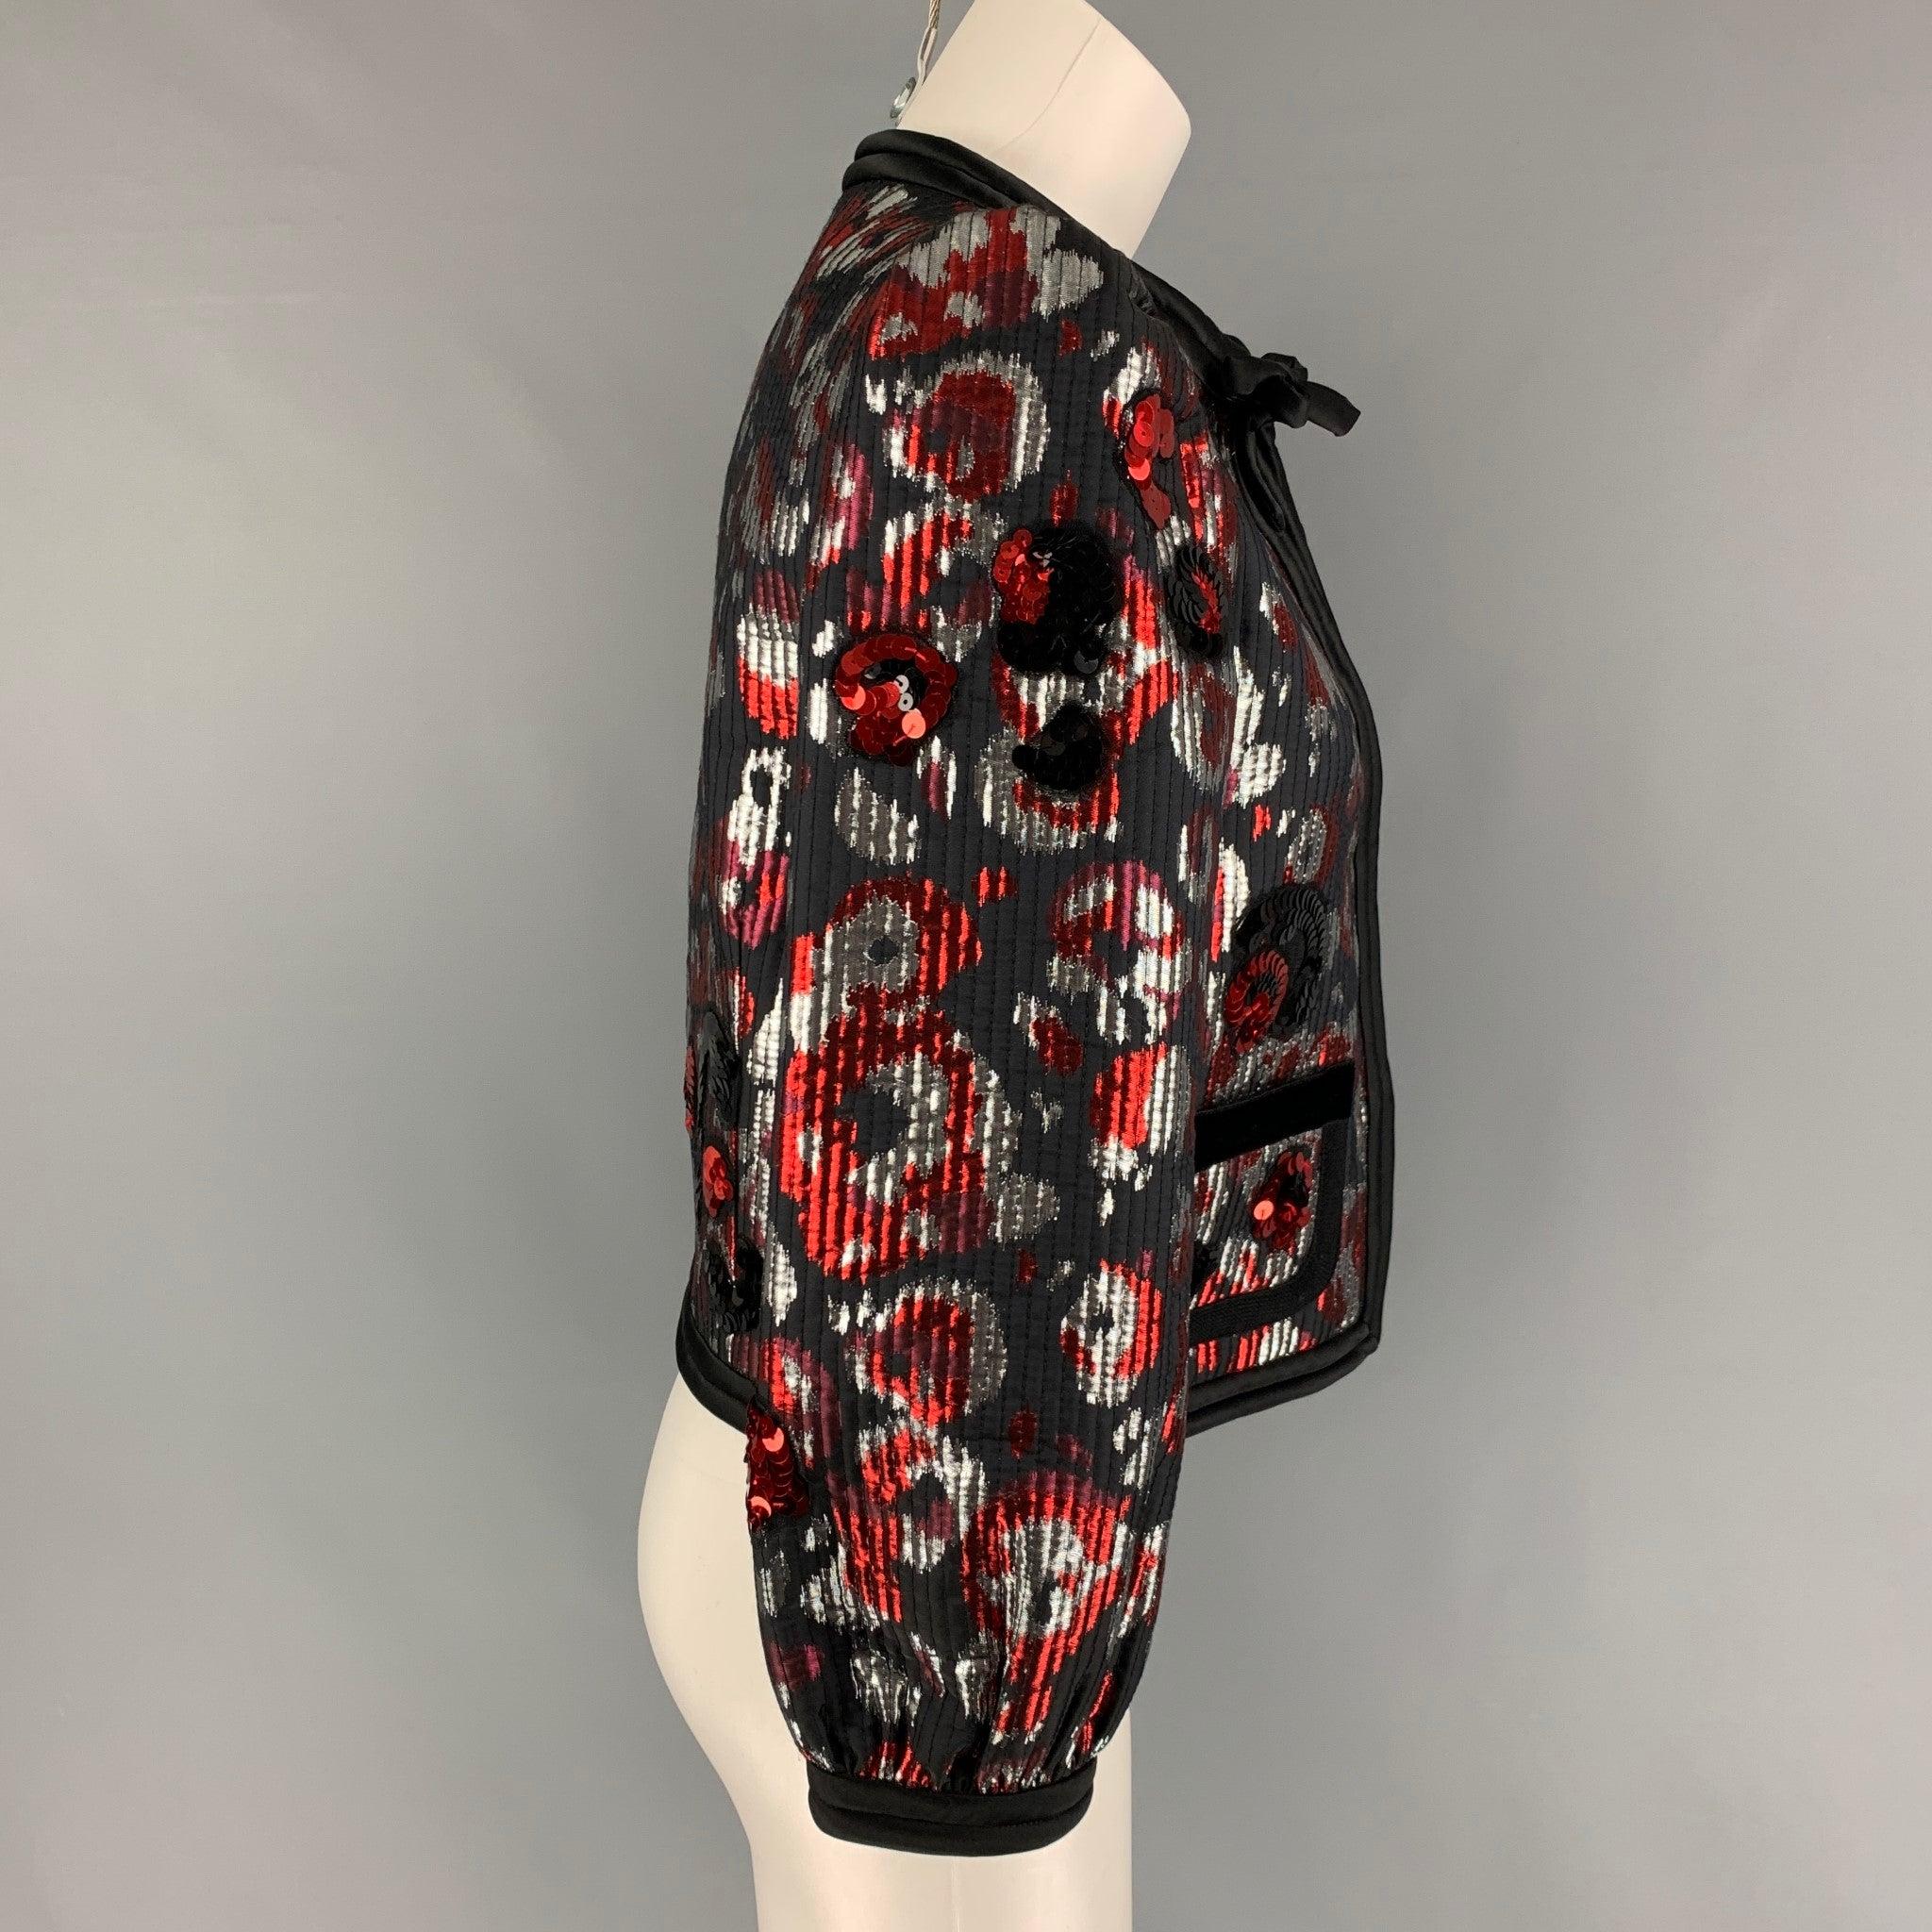 MARC JACOBS jacket comes in a black & red polyester featuring a cropped style, sequin details, front bow, front pockets, and a hook & loop closure.
Very Good
Pre-Owned Condition. 

Marked:   2 

Measurements: 
 
Shoulder: 13.5 inches  Bust: 35